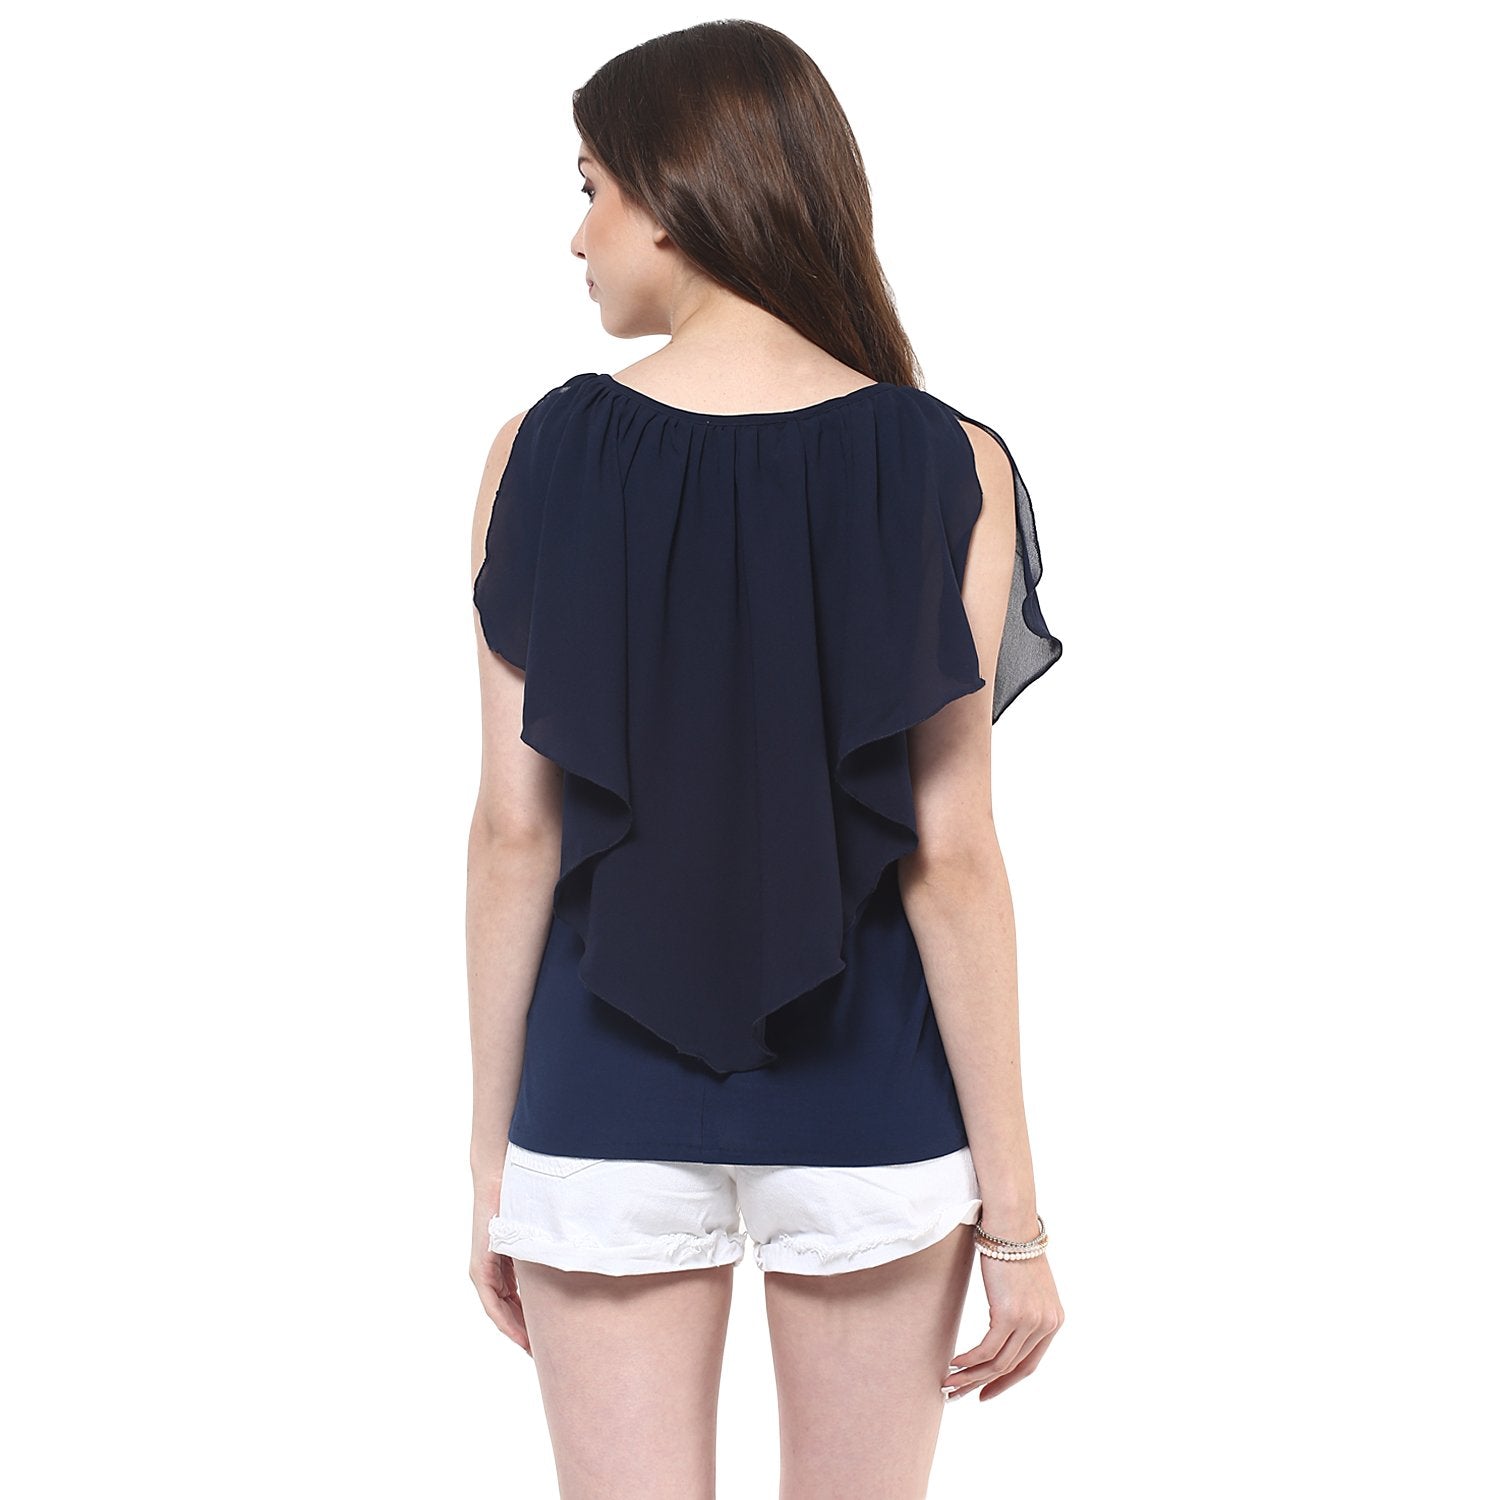 Women's Solid Flared Jersey Top - Pannkh